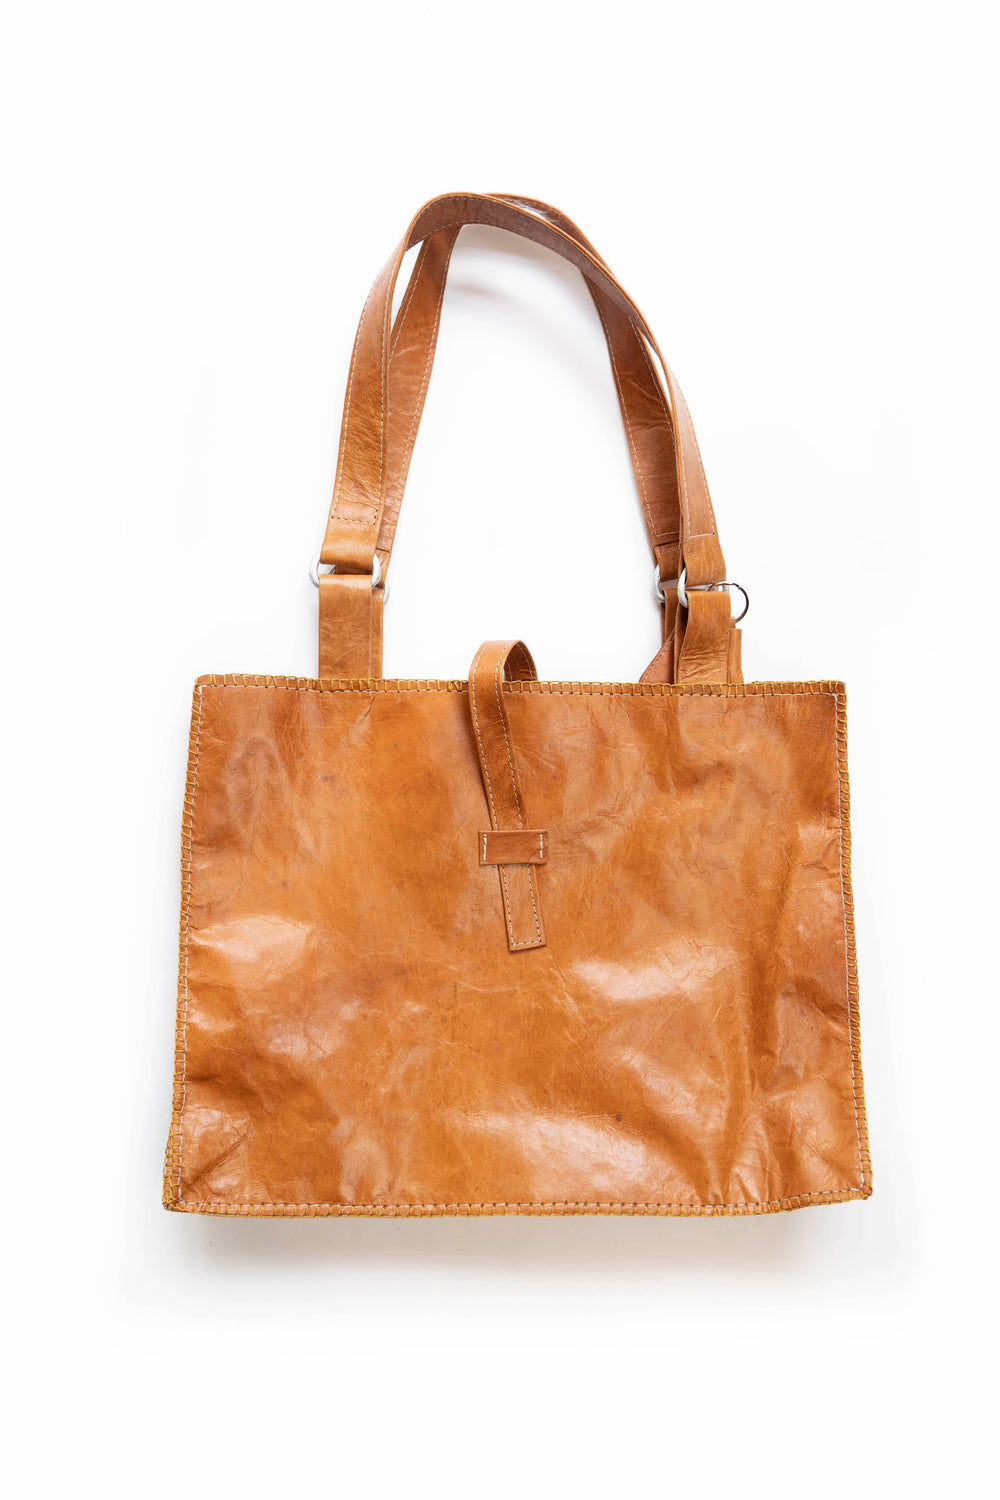 Goat Leather Tote by 2nd Story Goods